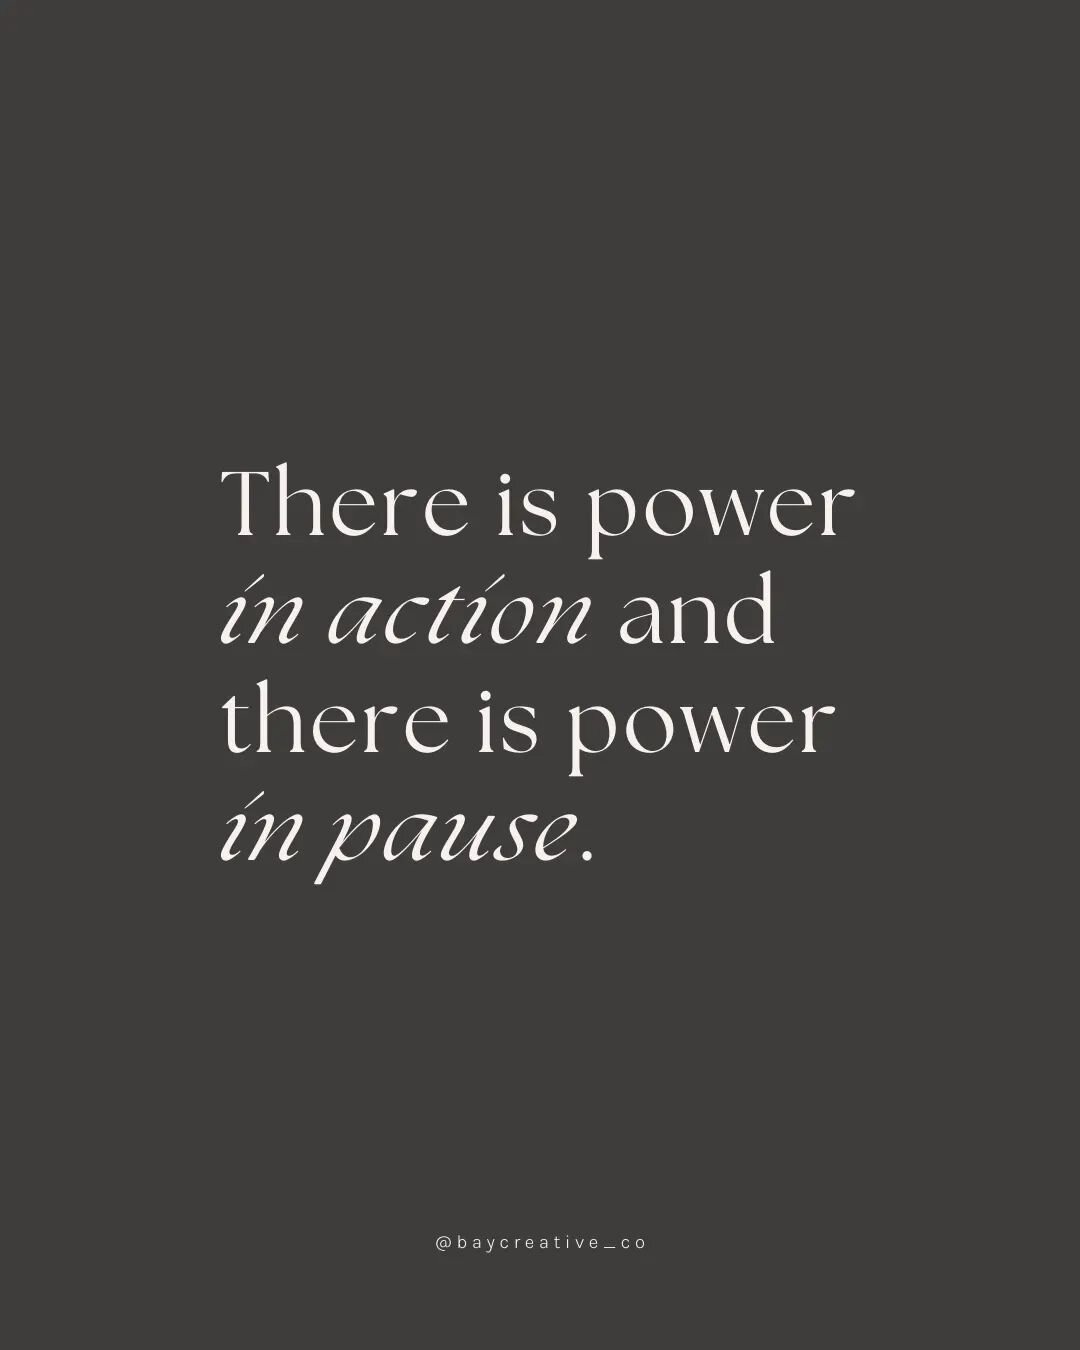 Words to inspire: There is power in action, and there is power in pause.

Taking a moment to really digest the impact of a brand, to pause and reset the direction. To reignite design elements and passion within a business is what can lead to a powerf